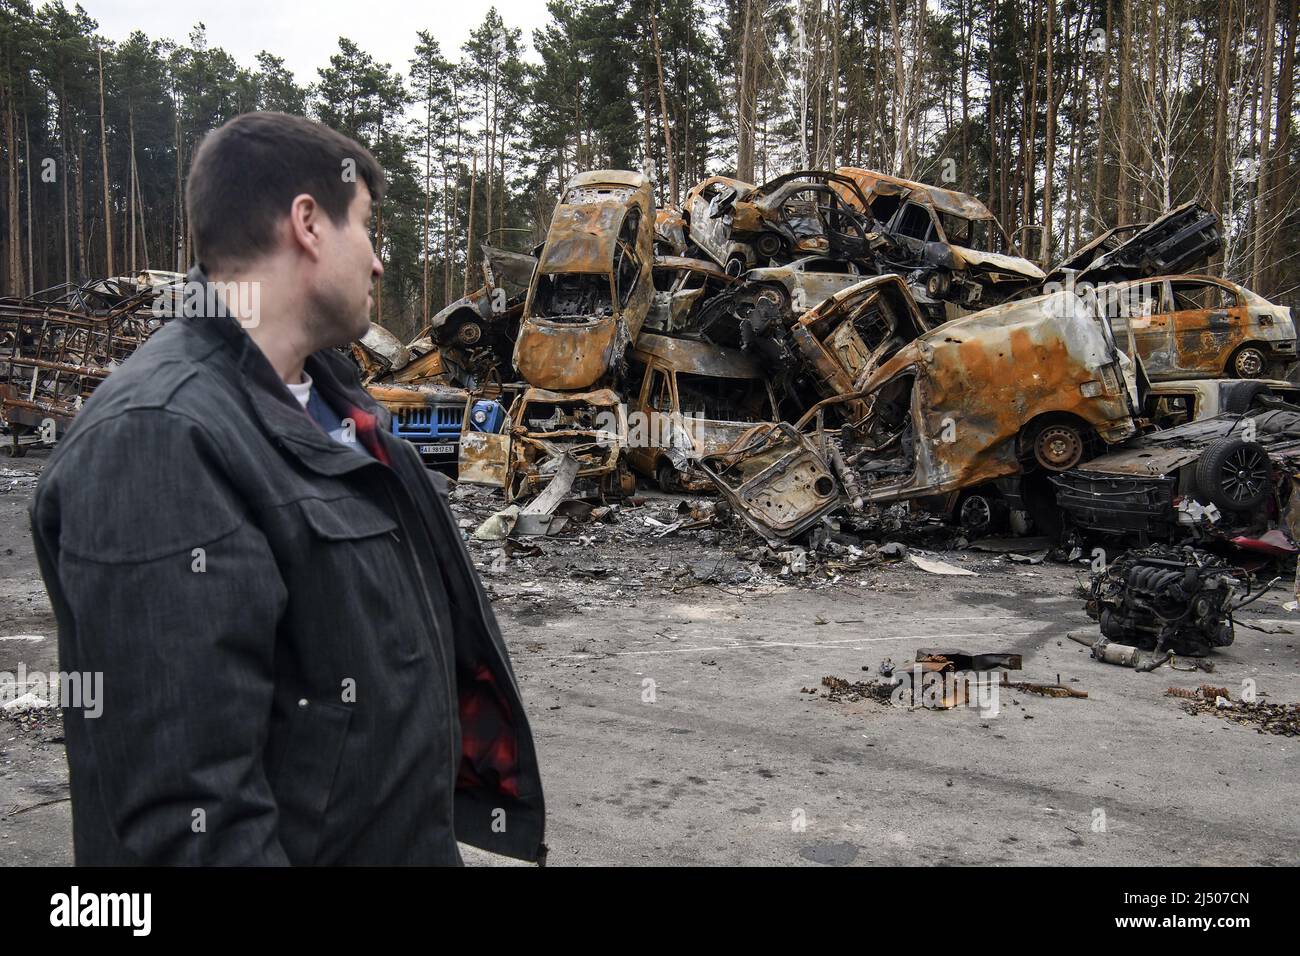 A Ukrainian man looks at cars destroyed during the ongoing Russian invasion of Ukraine, at a junkyard in Irpin, Ukraine on Monday, April 18 2022. Russian troops entered Ukrainian territory resulting in fighting and destruction in the country, a huge flow of refugees, and multiple sanctions against Russia Photo by Vladyslav Musiienko/UPI Credit: UPI/Alamy Live News Stock Photo